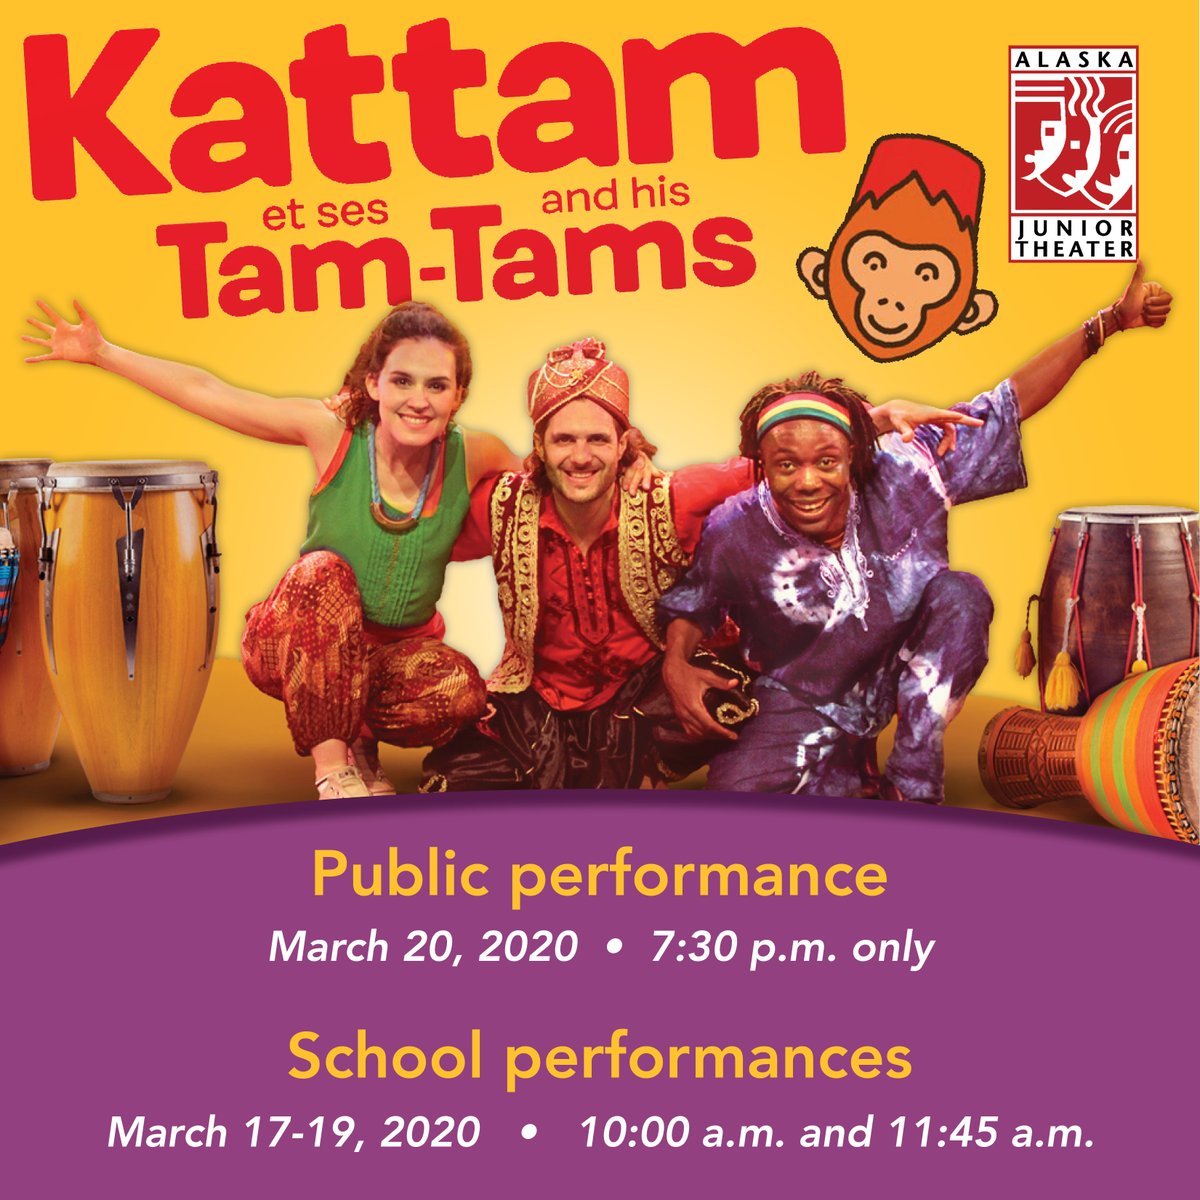 Can you hear that? It's Kattam and his Tam-Tams coming to a stage near you! Purchase your tickets online at bit.ly/2RyTz9C or 263-ARTS, or you can call 272-7546 for more information.
#AlaskaJuniorTheater #thingstodoinAlaska #Anchorage #Alaska